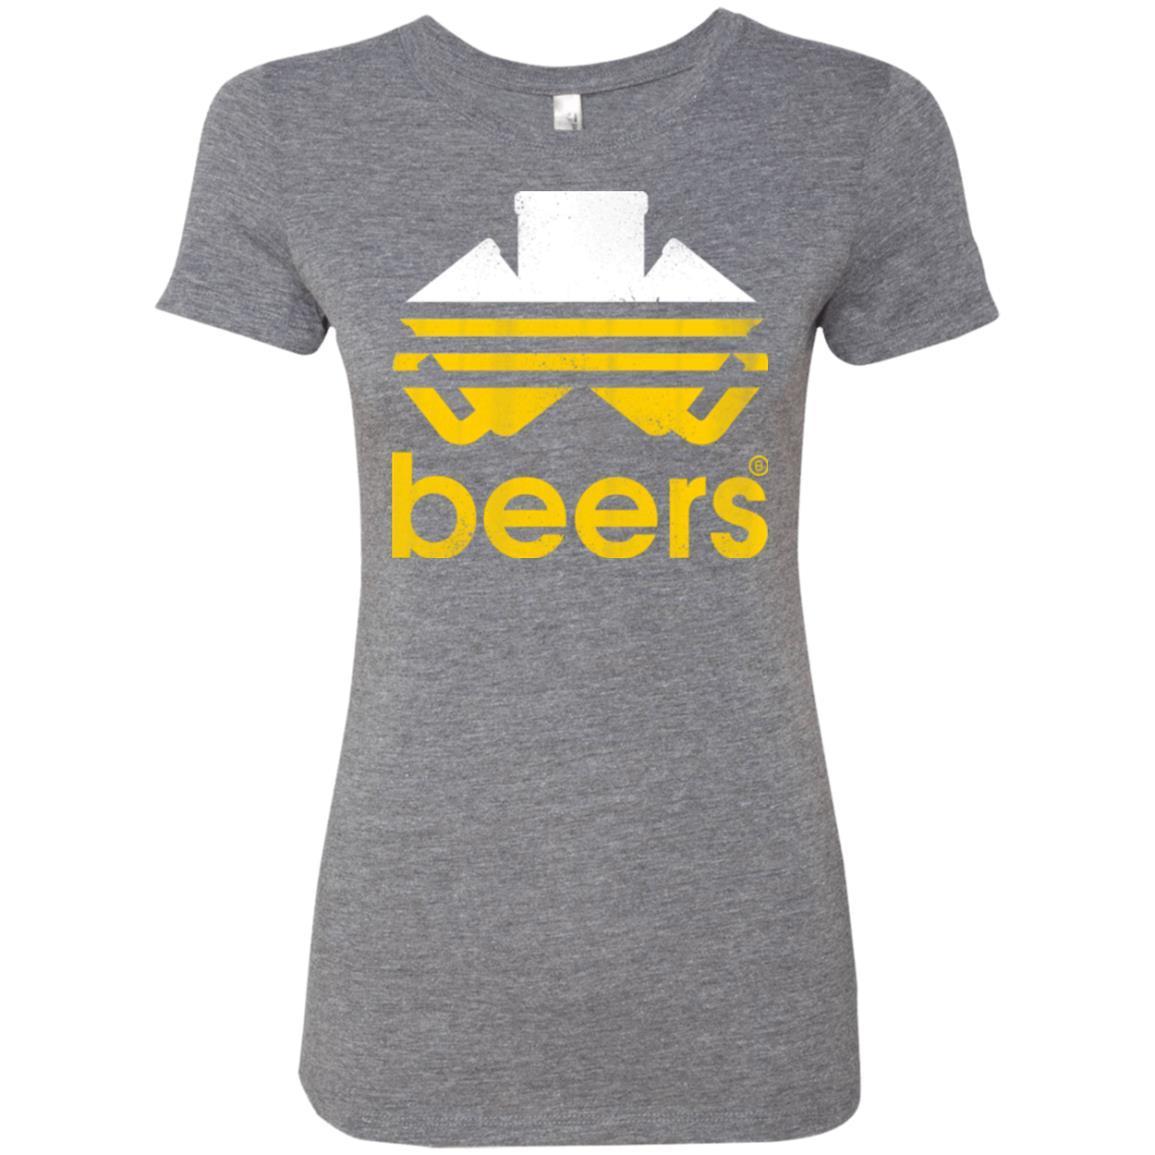 T-Shirts Premium Heather / Small Beers Women's Triblend T-Shirt